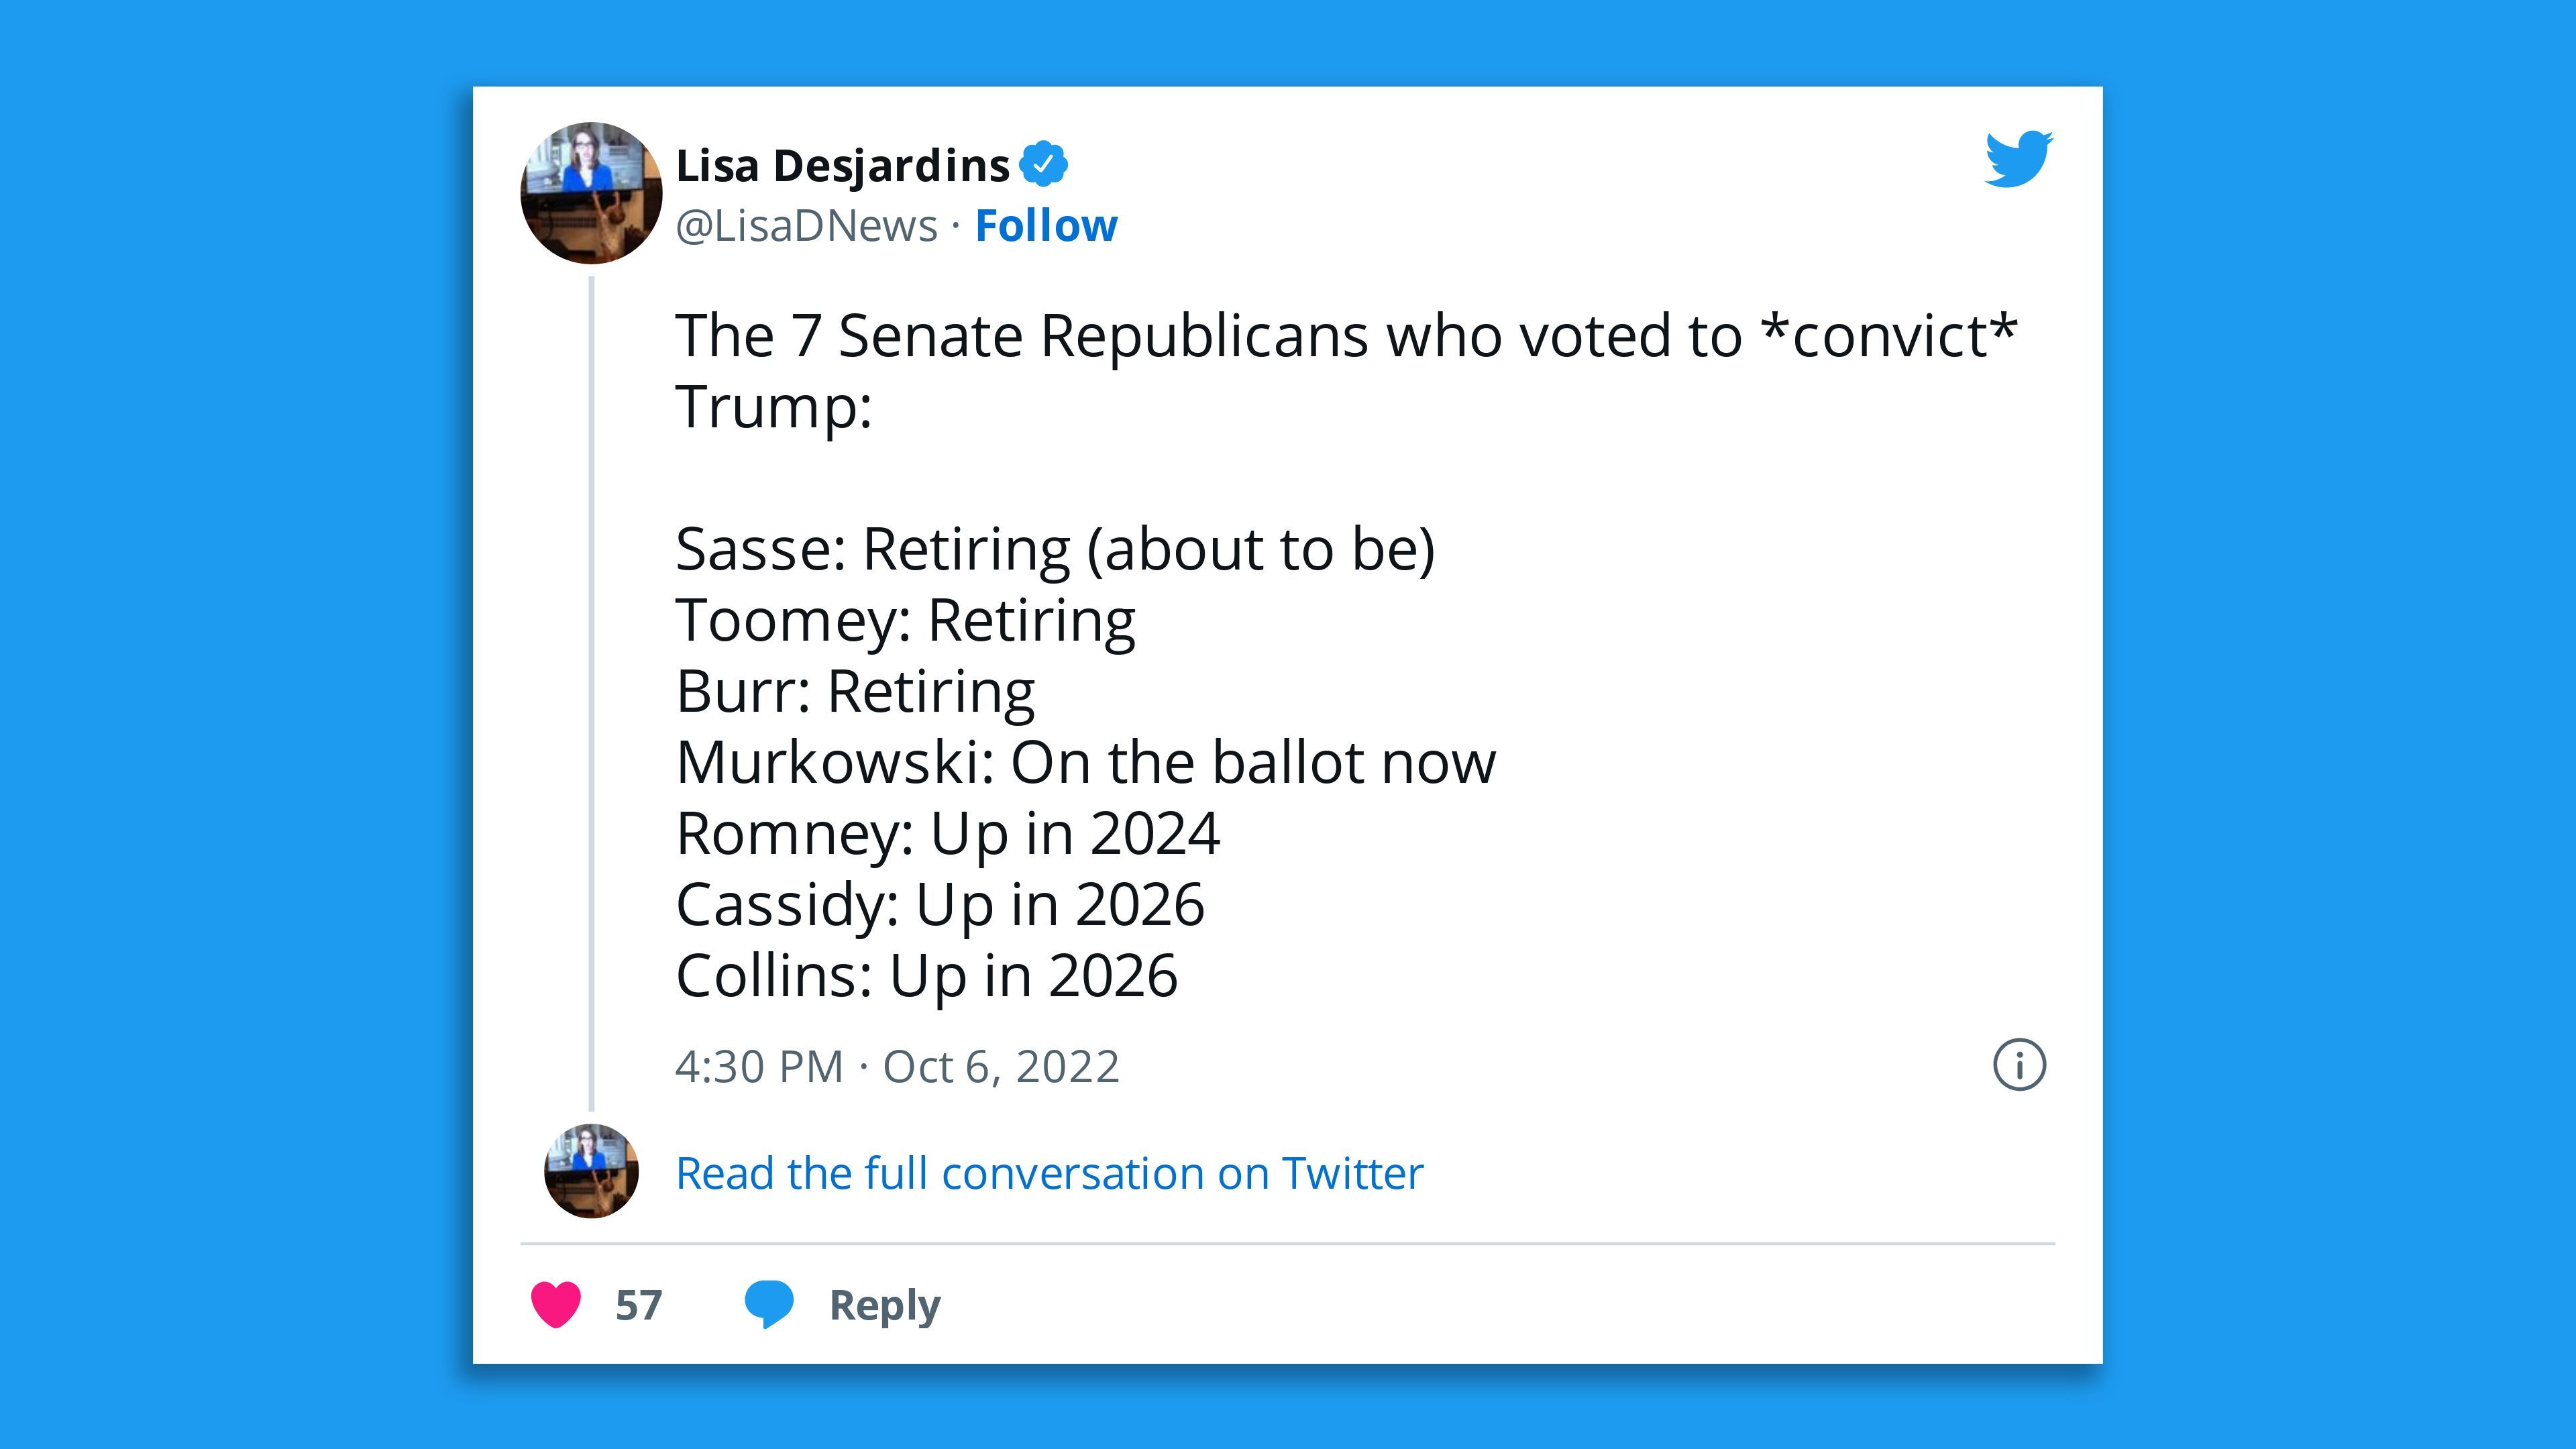 Tweet about Senate Republicans who voted to convict Trump